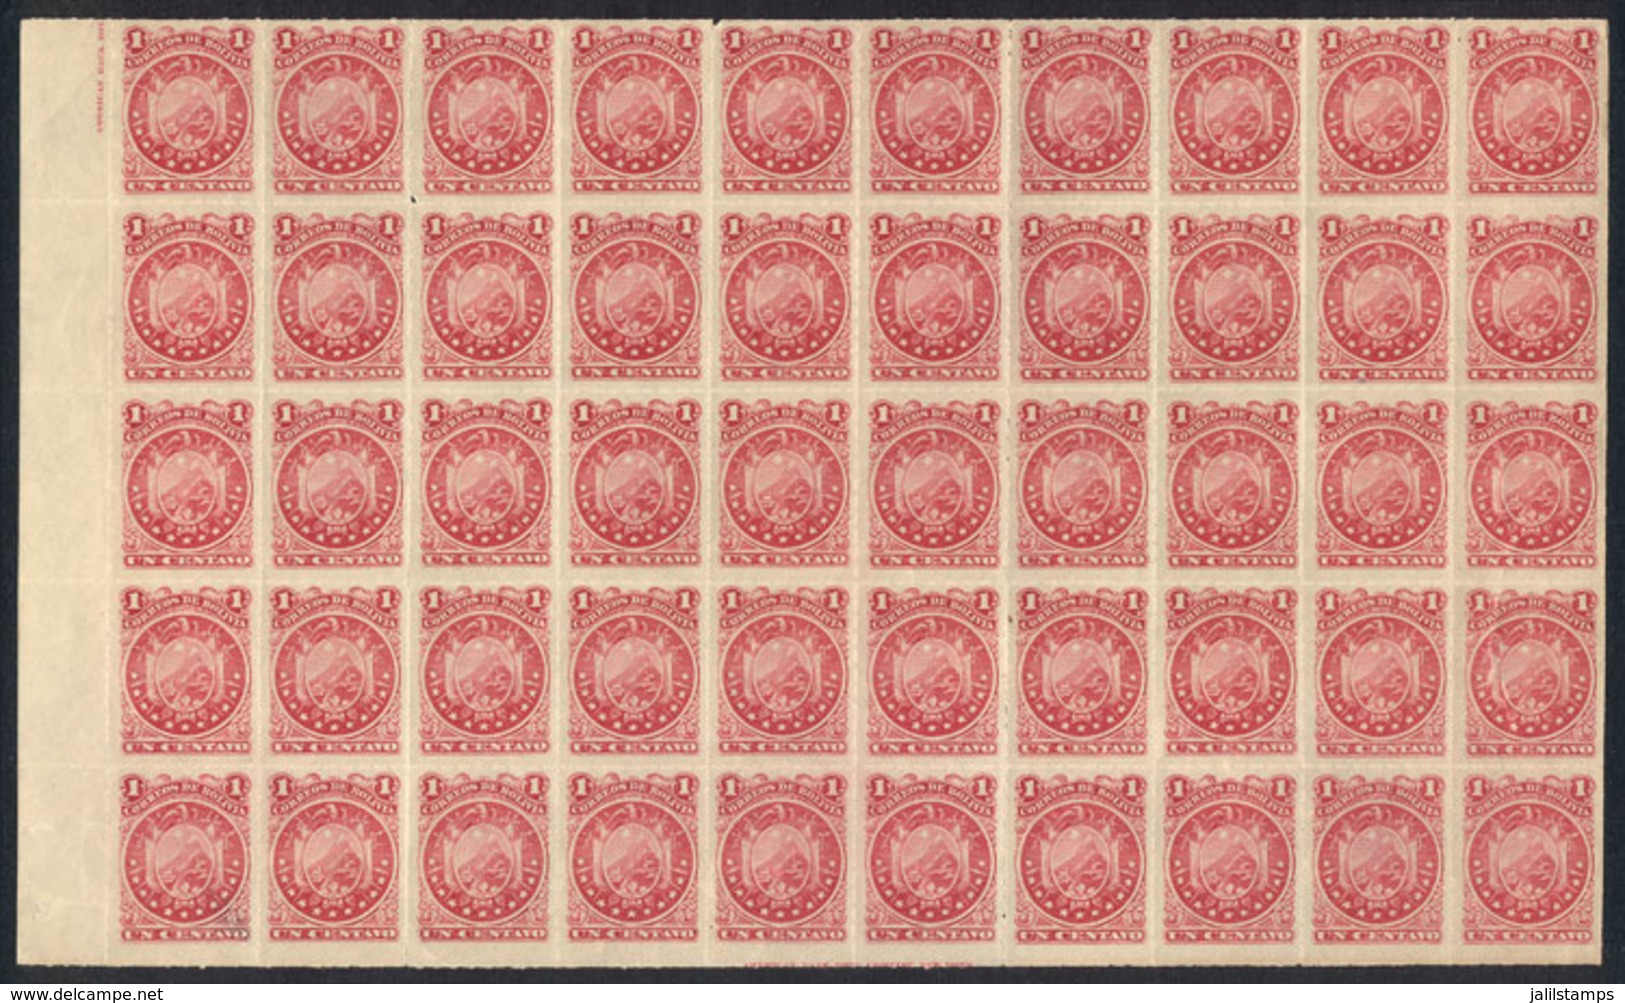 BOLIVIA: Yv.24, 1887 1c. Rouletted, Fantastic BLOCK OF 50 Mint Never Hinged, Superb! - Bolivia